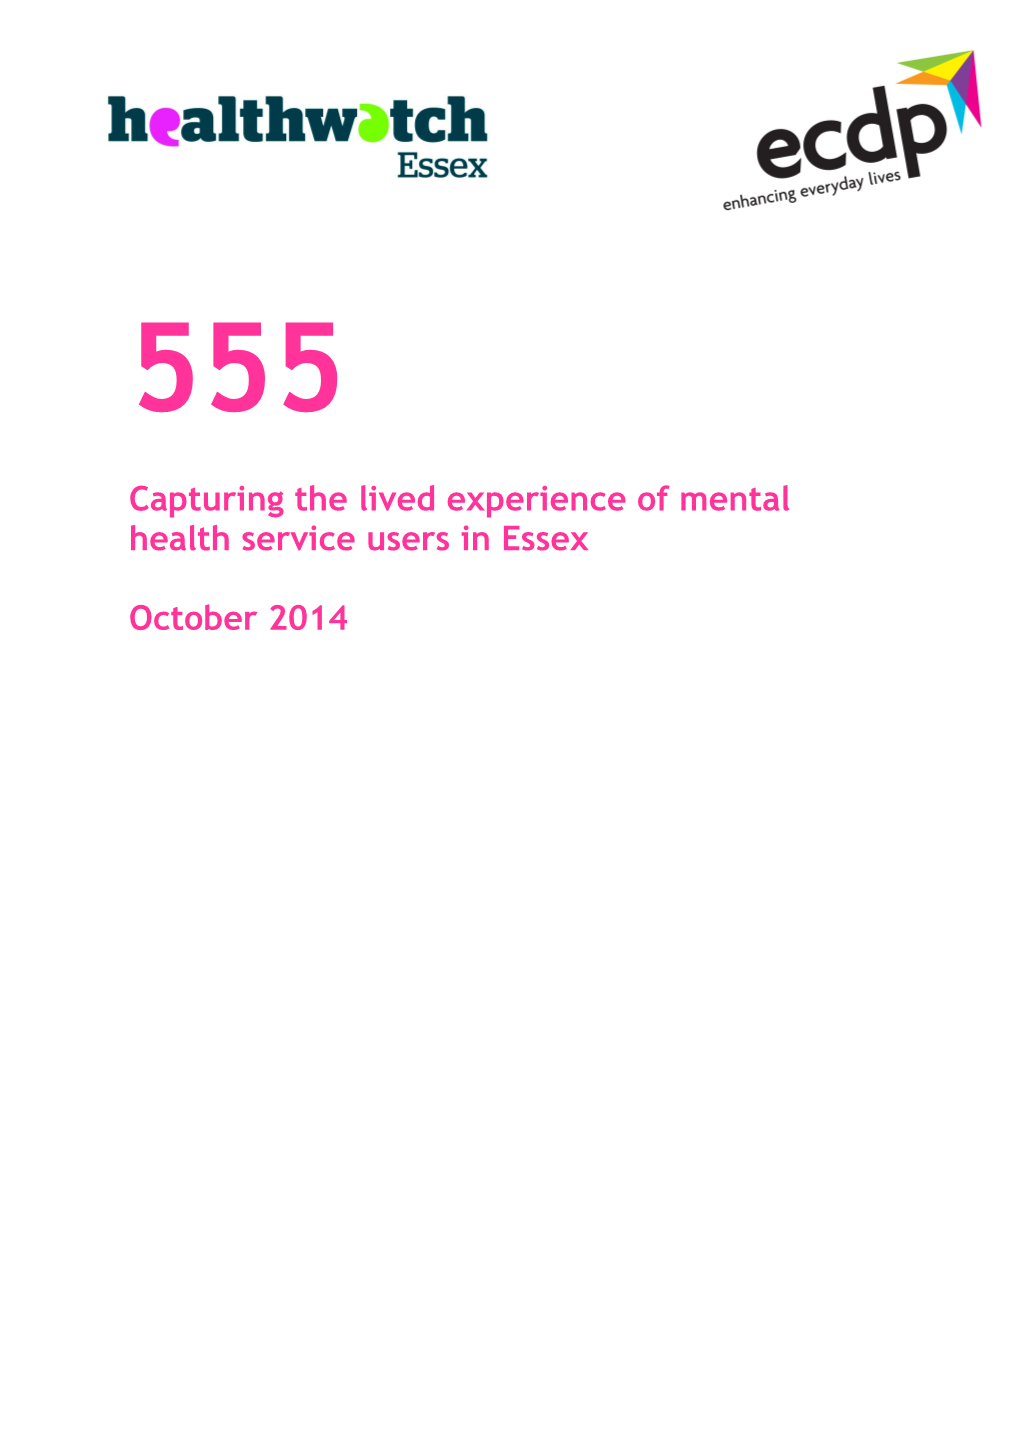 Capturing the Lived Experience of Mental Health Service Users in Essex